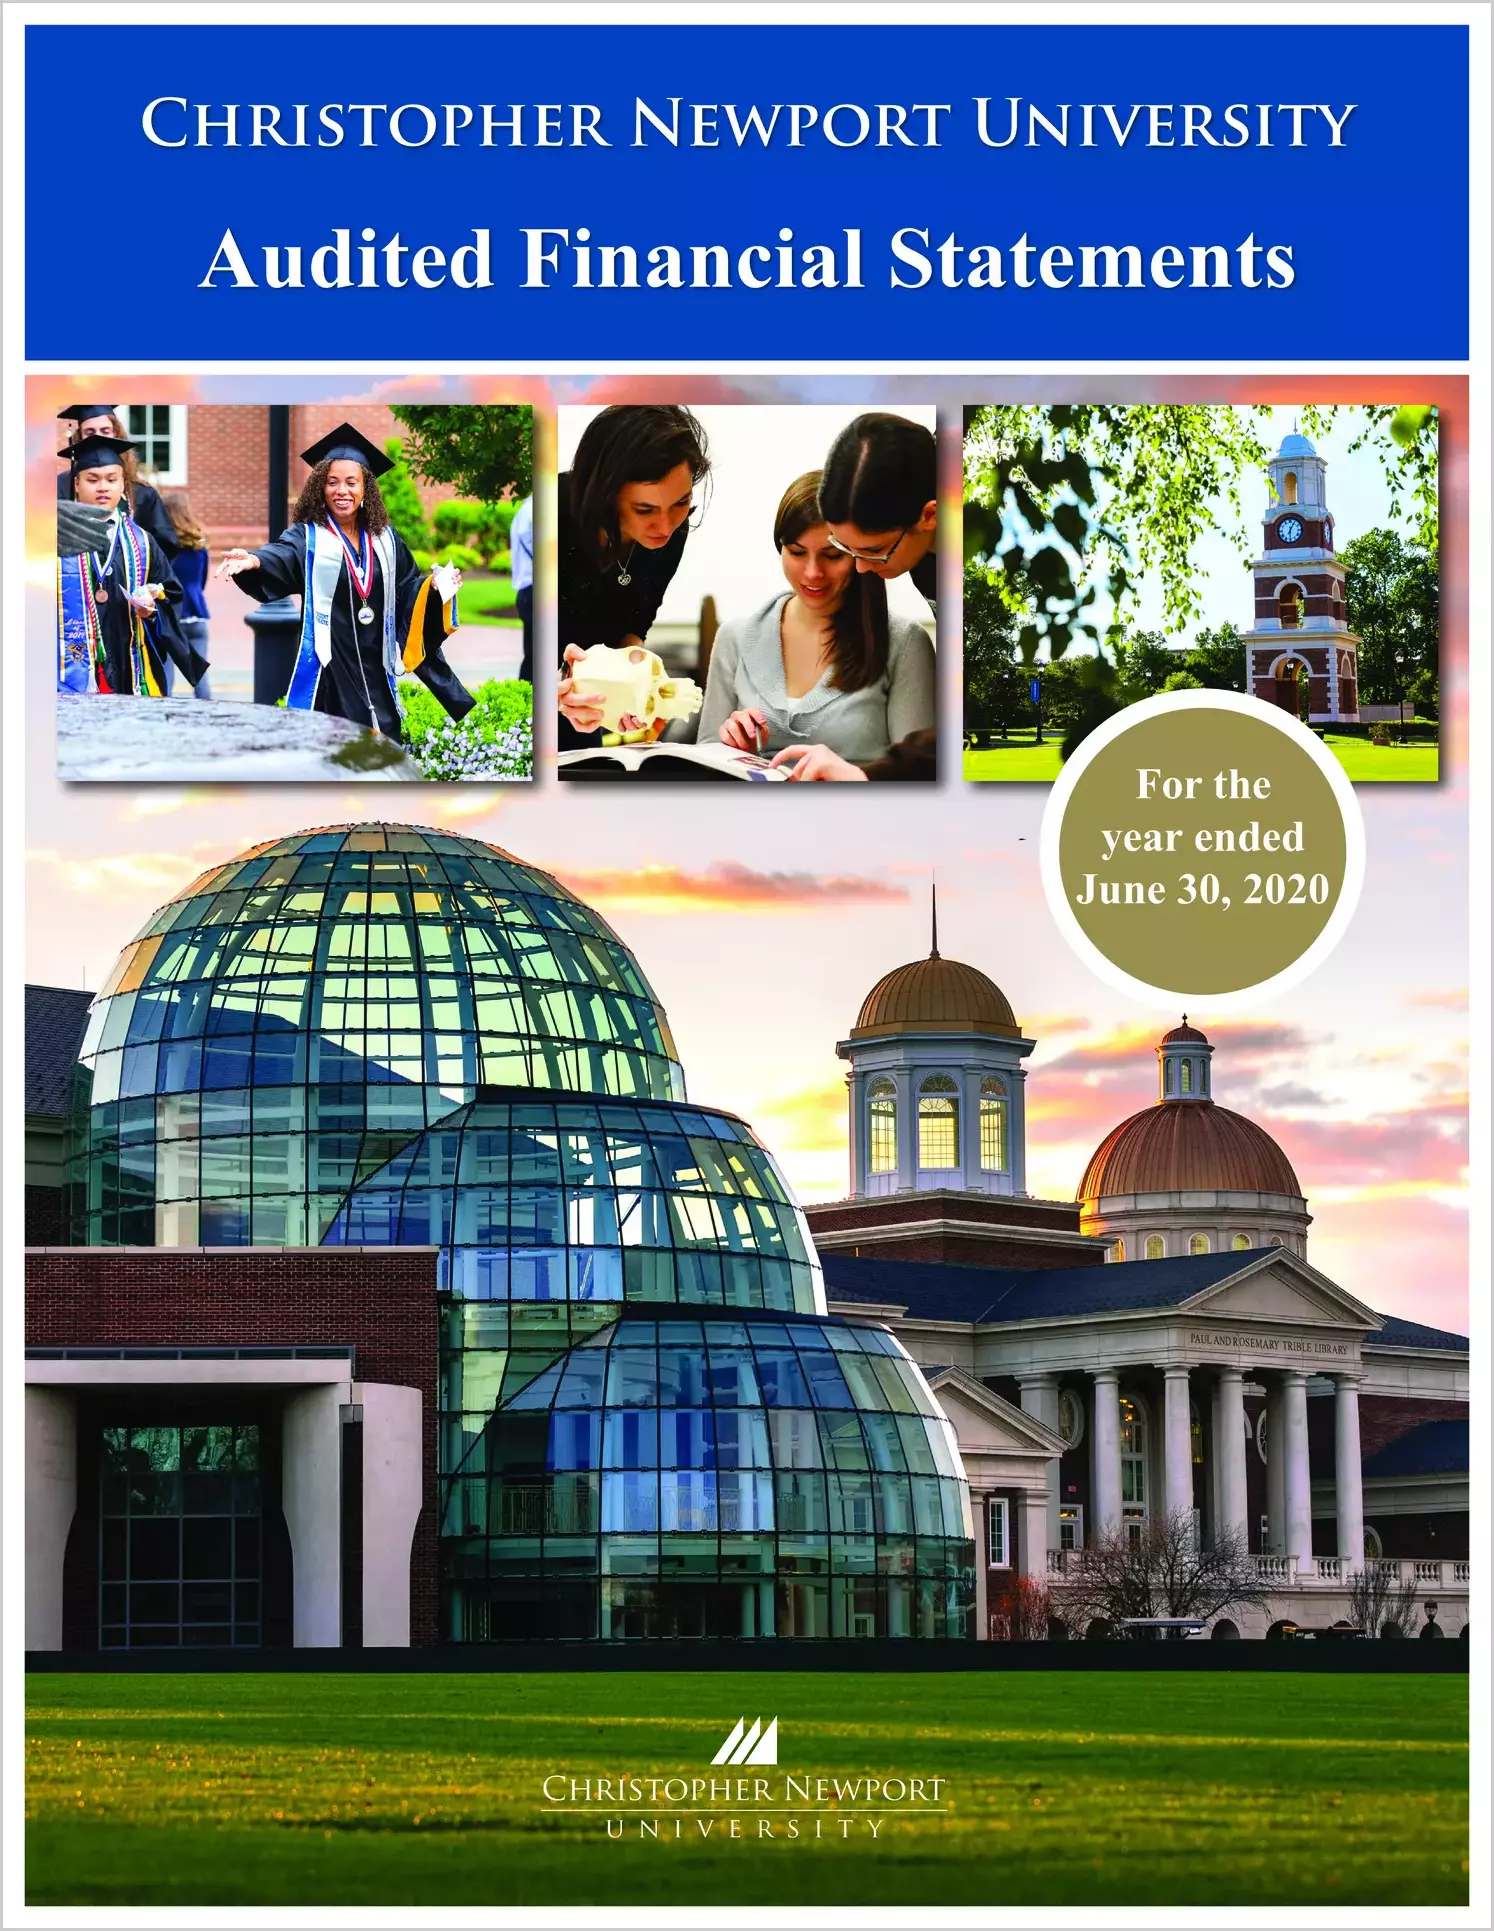 Christopher Newport University Financial Statements for the year ended June 30, 2020